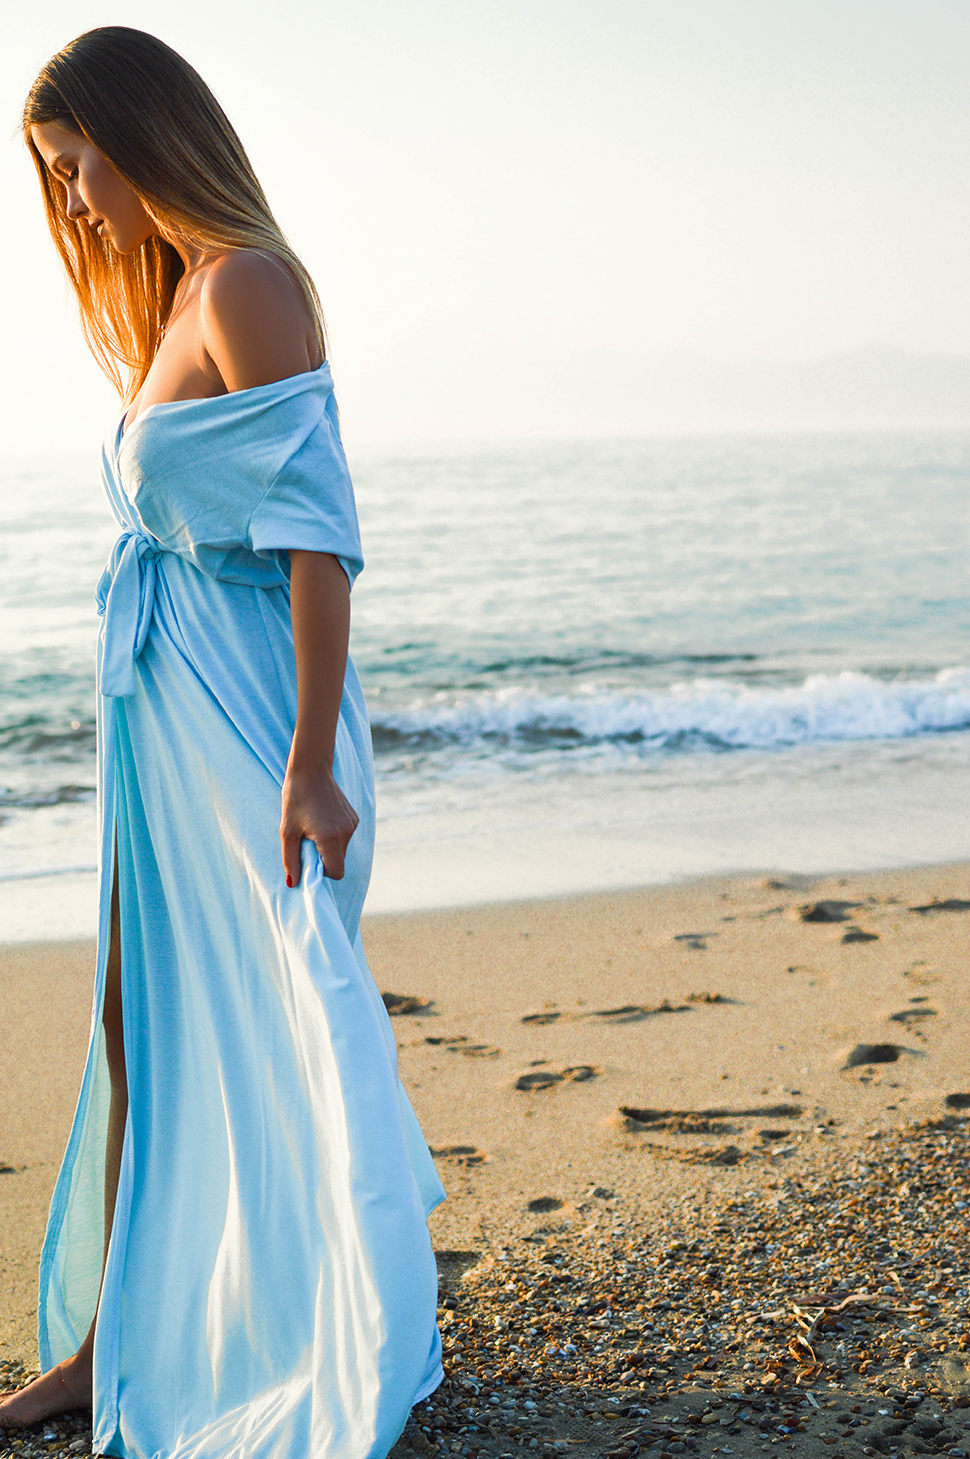 5 Reasons Why To Look More Feminine In Greece